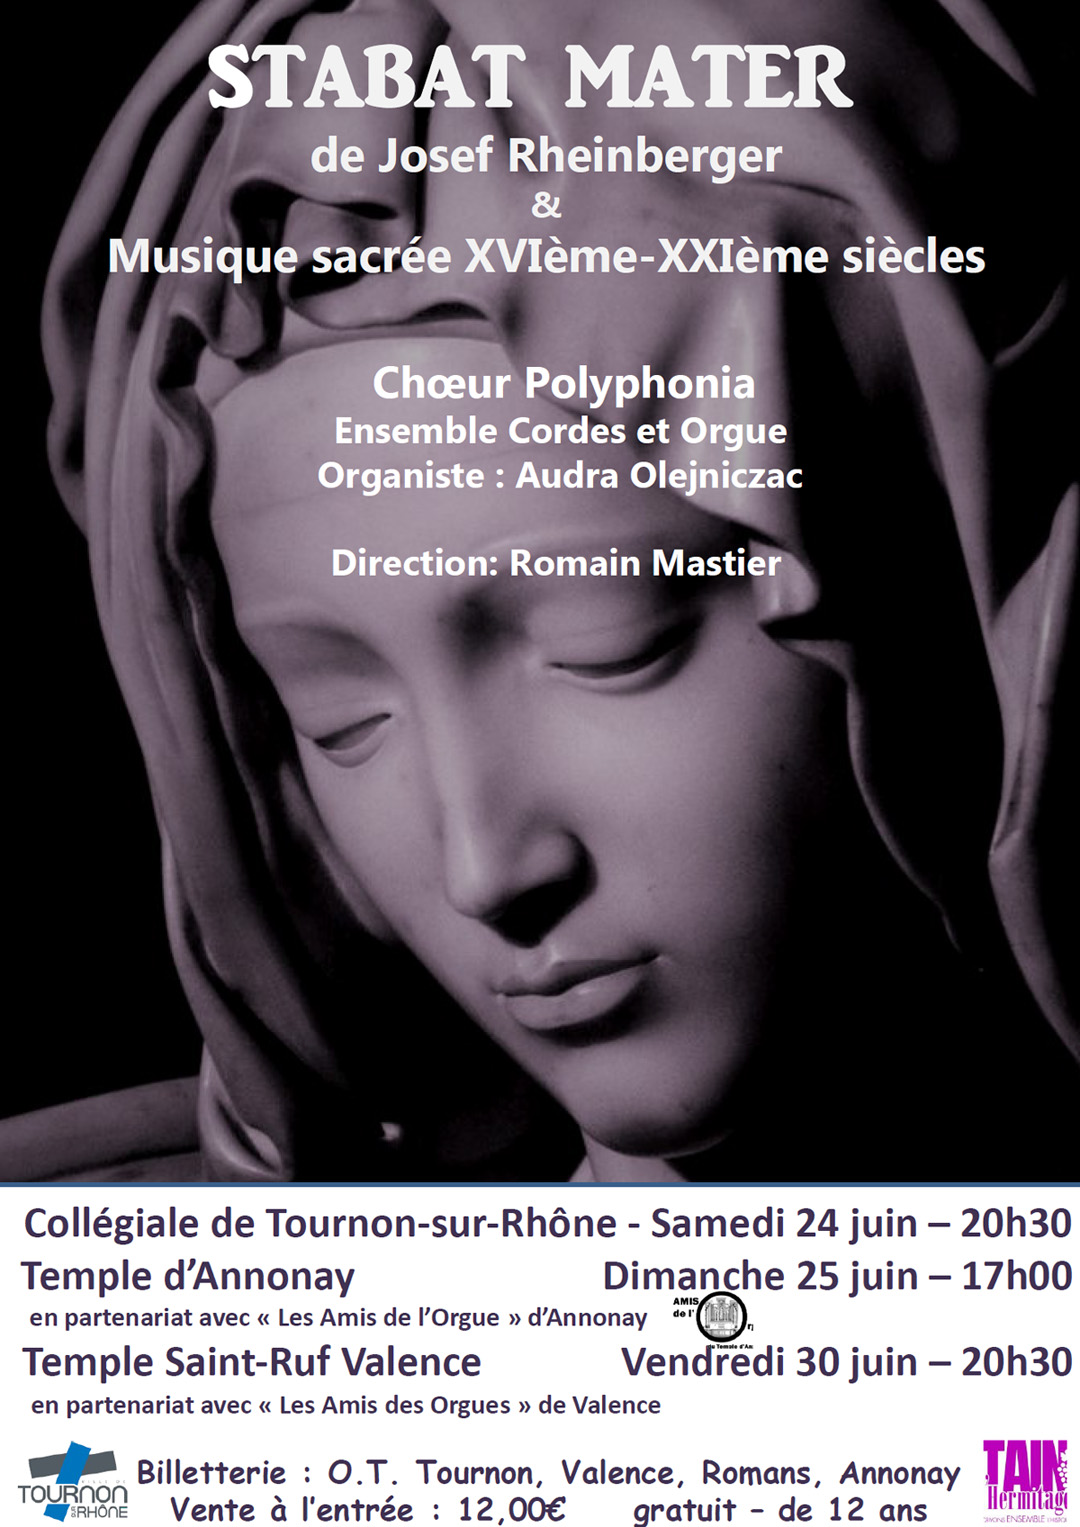 STABAT MATER. Concerts polyphonia